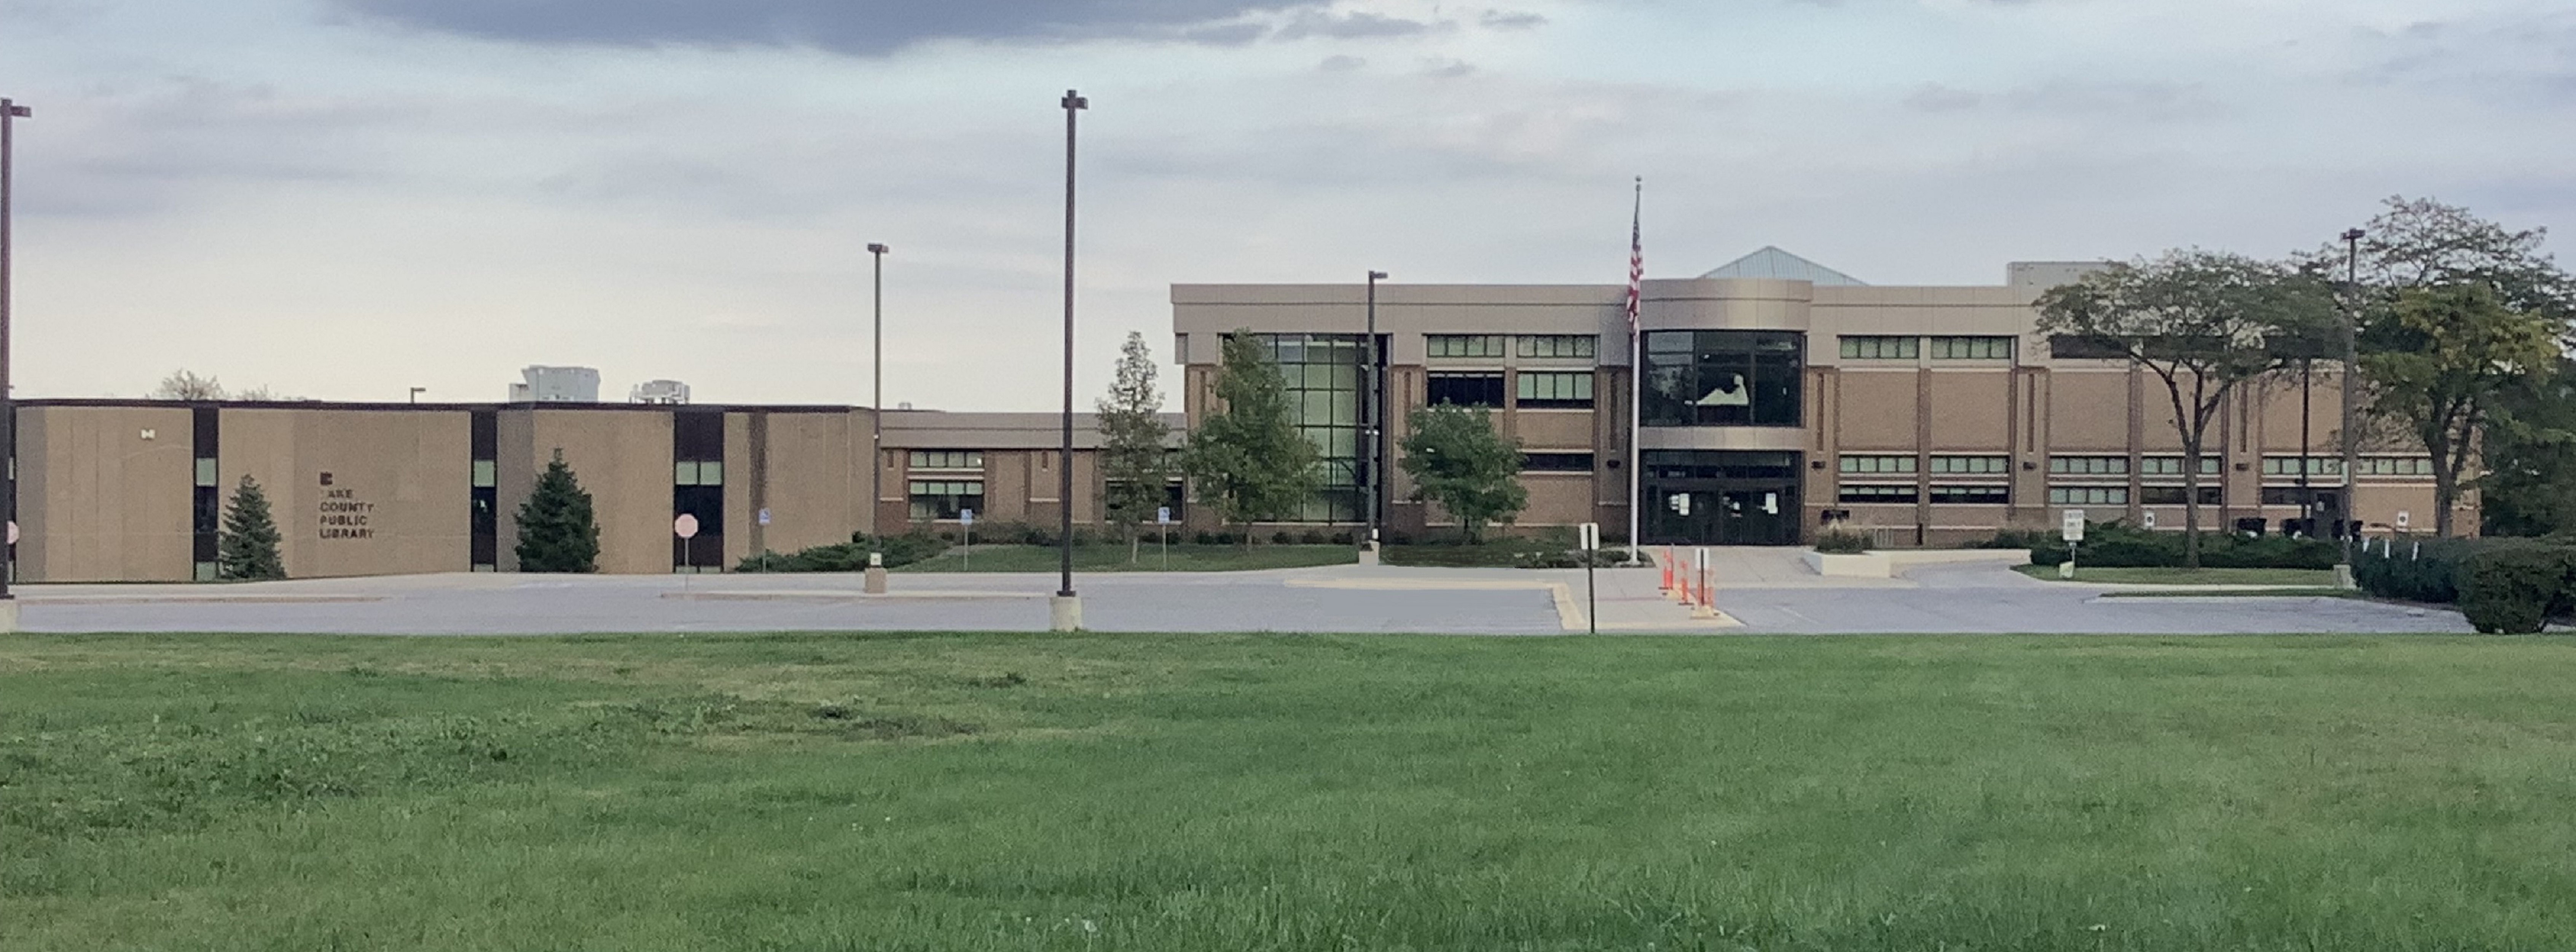 The exterior of Merrillville Branch taken from a distance